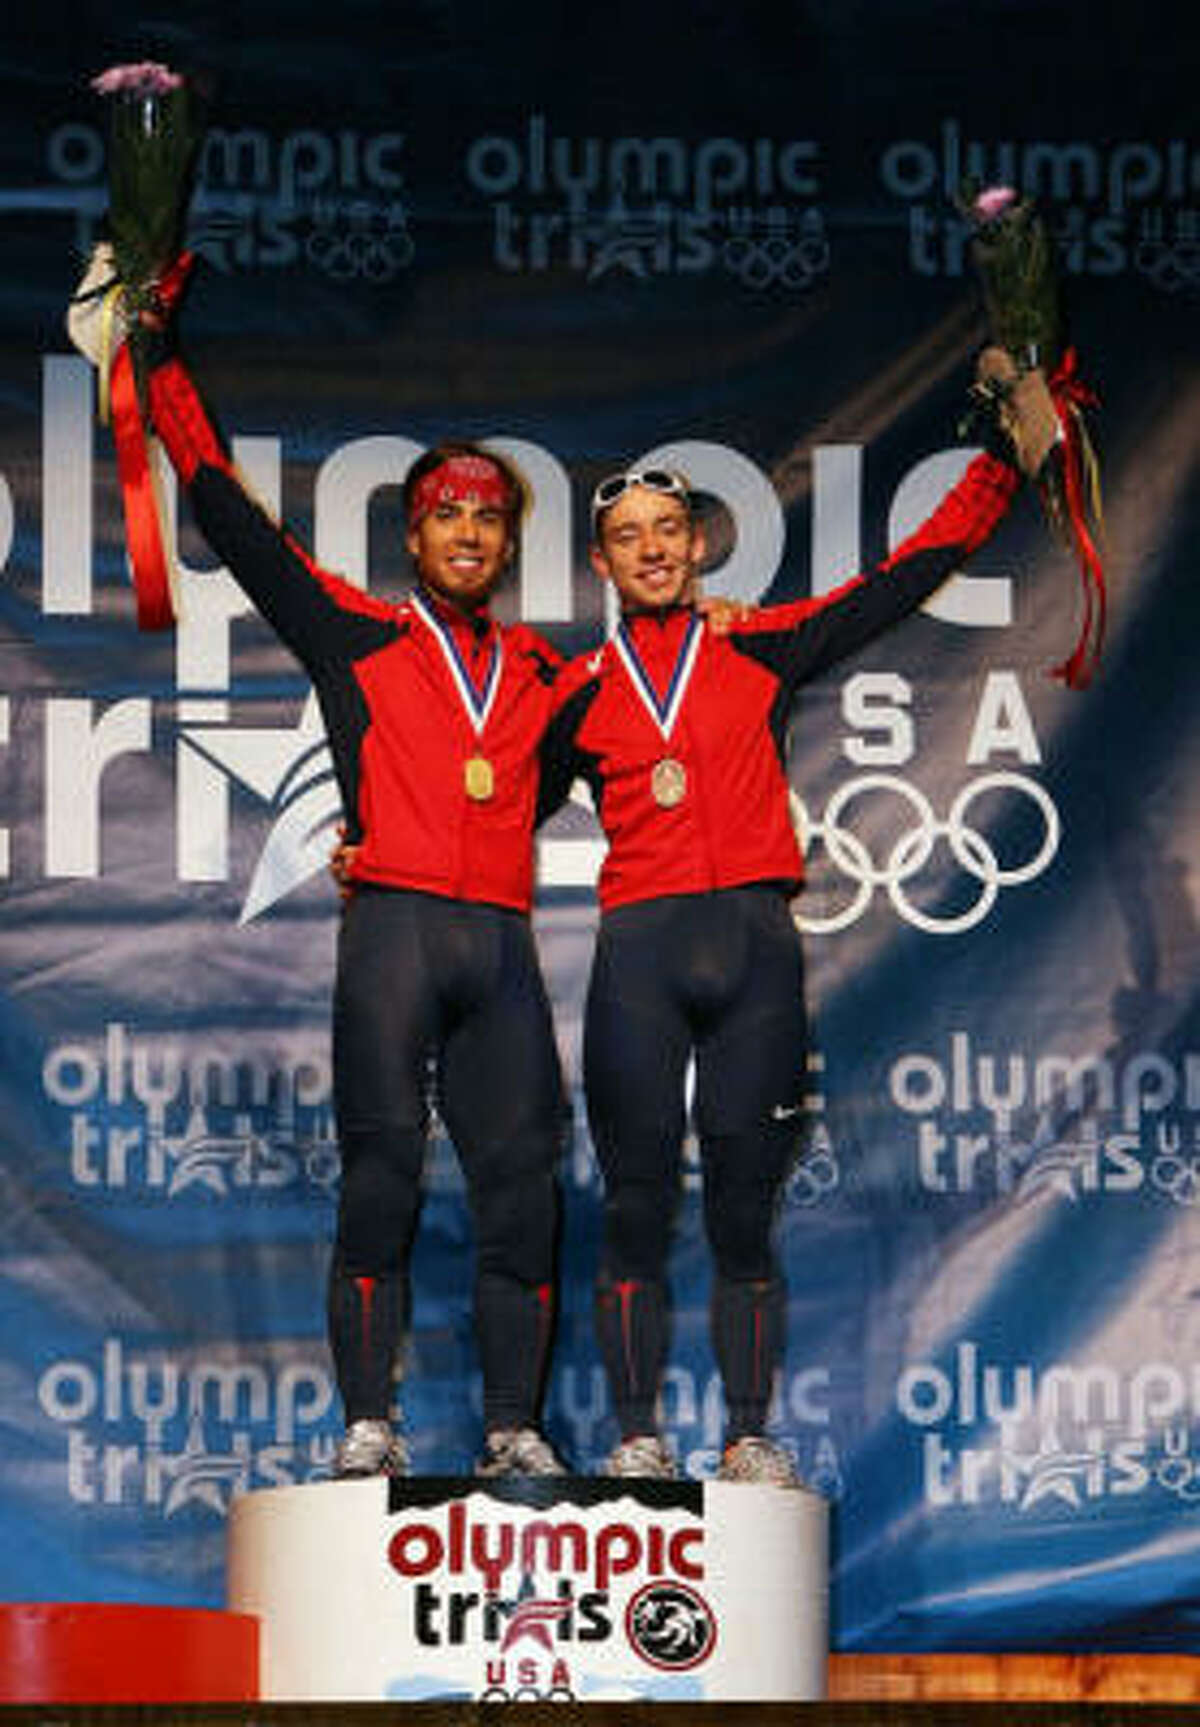 Jordan Malone, right, finished third place at the U.S. Short Track Speedskating Championships. In the Olympics, Apolo Anton Ohno, left, won a silver, but Malone finished with a DQ.